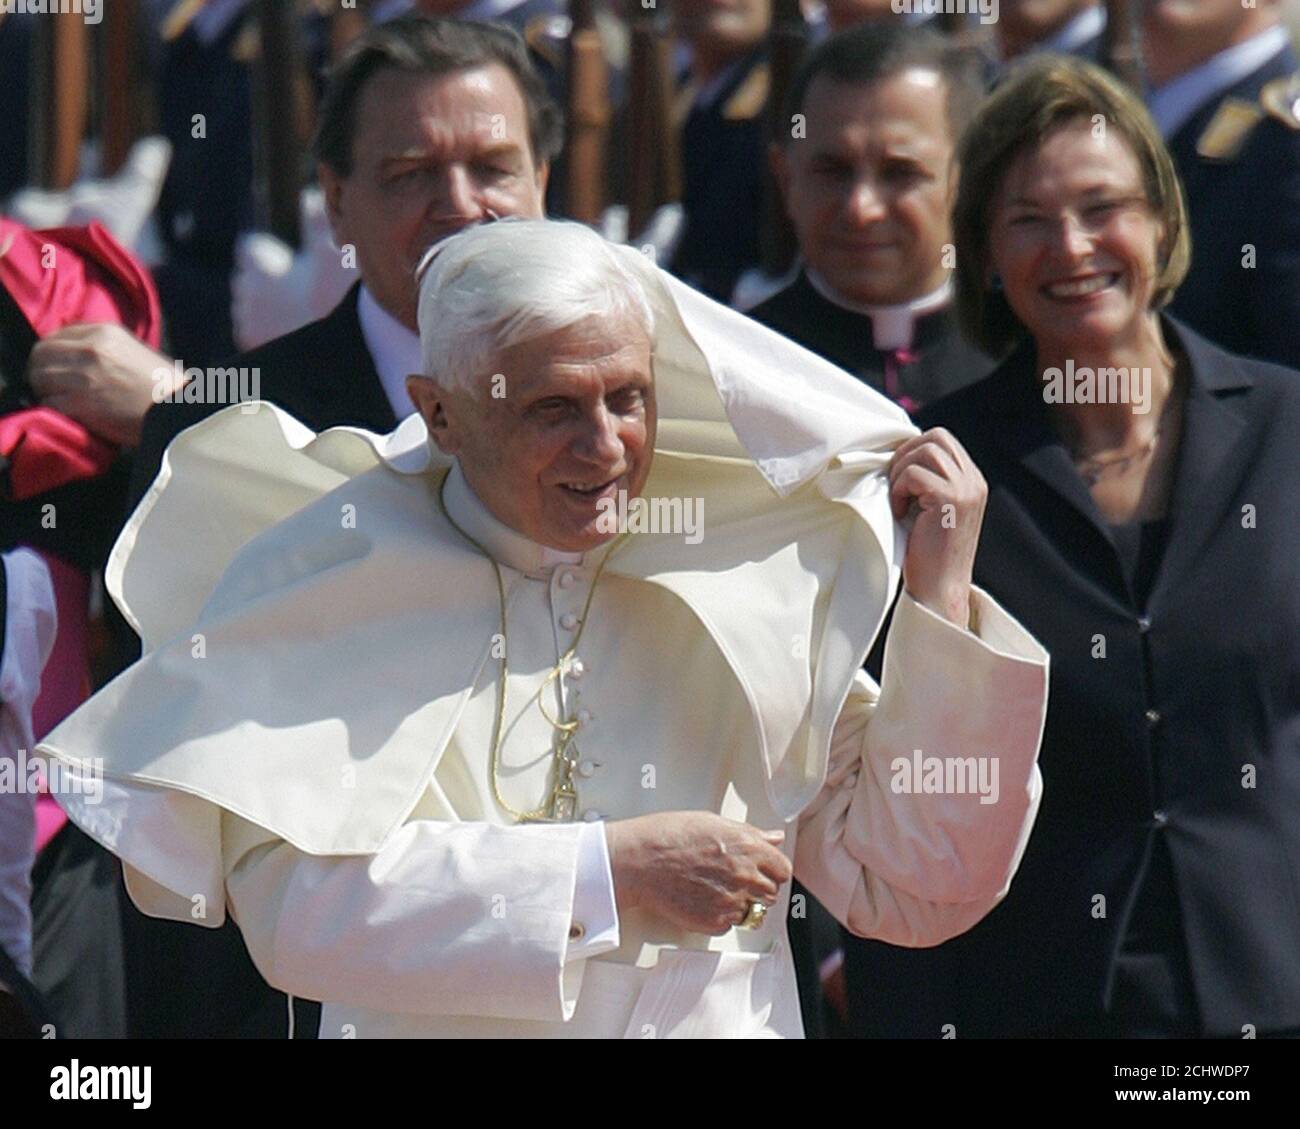 German Chancellor Gerhard Schroeder and the wife of the German President,  Eva Koehler (R) watch as Pope Benedict XVI removes his cape from his face  during his arrival at the airport in